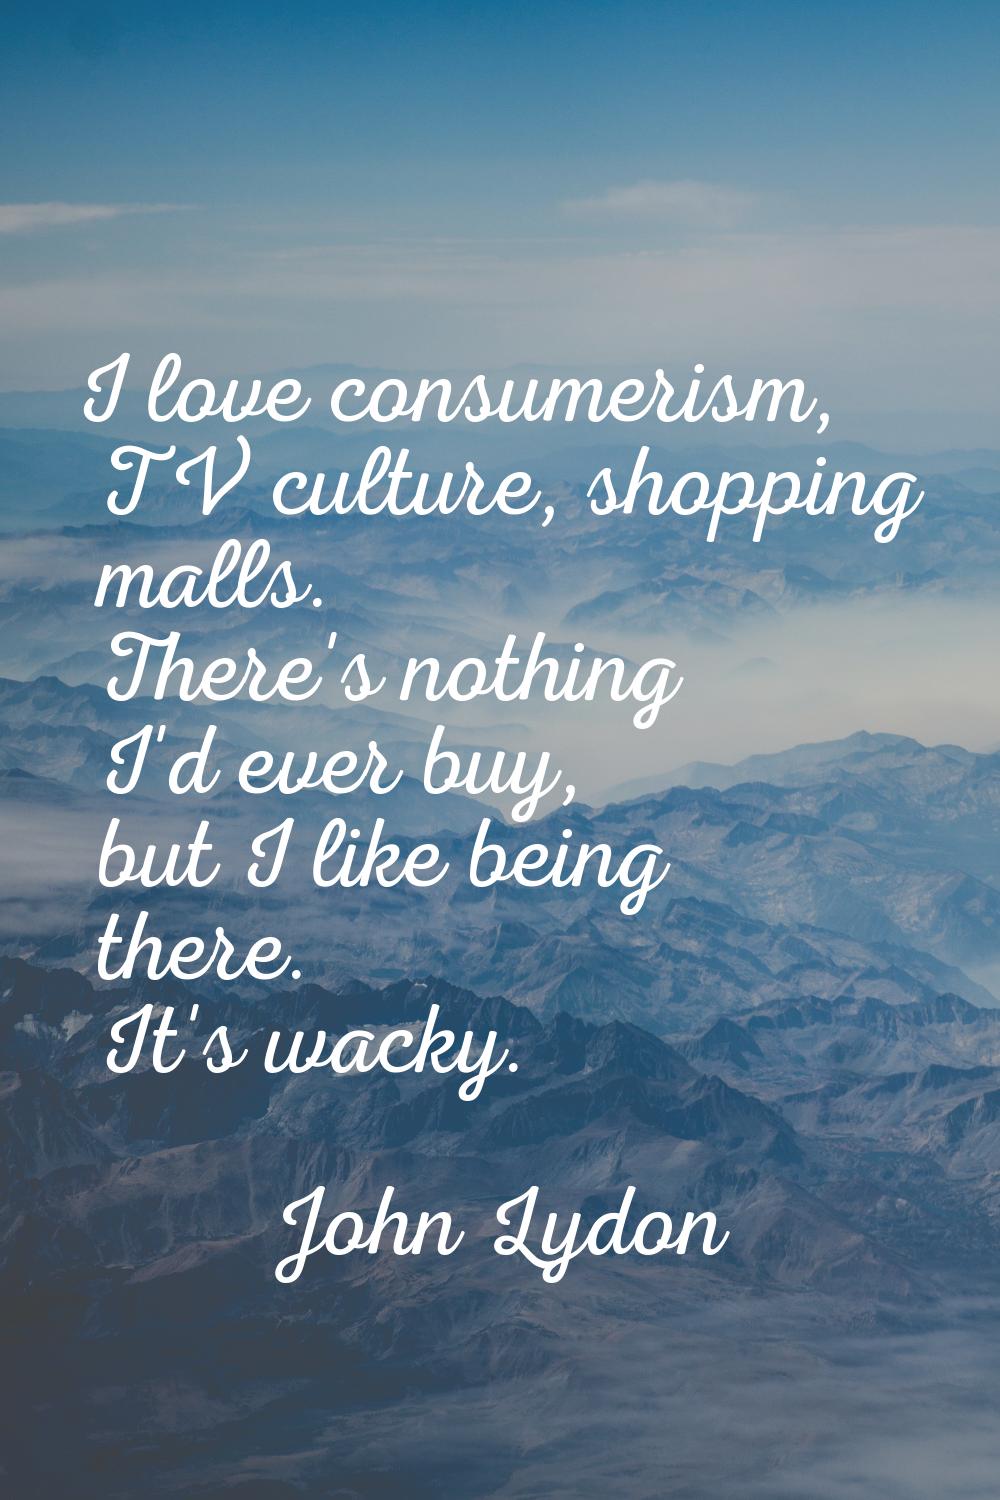 I love consumerism, TV culture, shopping malls. There's nothing I'd ever buy, but I like being ther